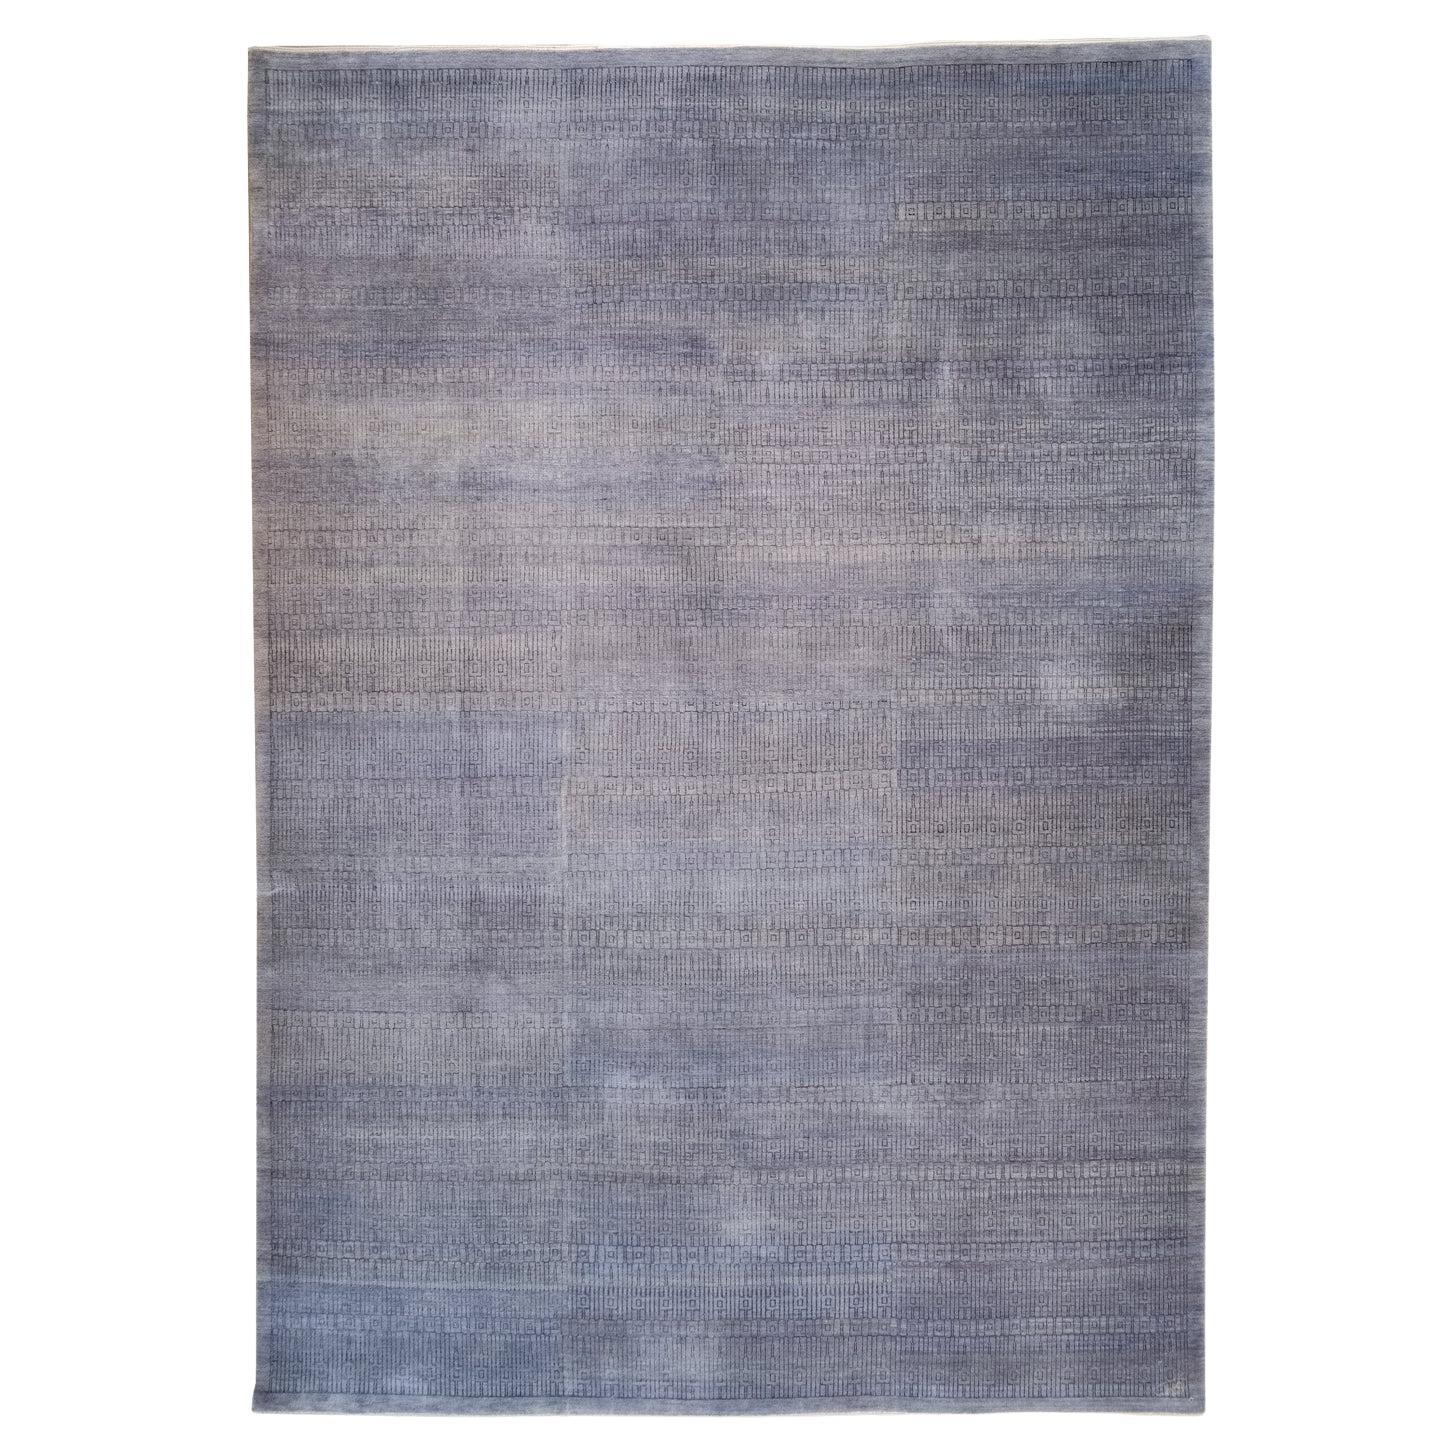 Orley Shabahang, Gray Modern Architectural Carpet, Wool, Hand-Knotted, 9' x 12' For Sale